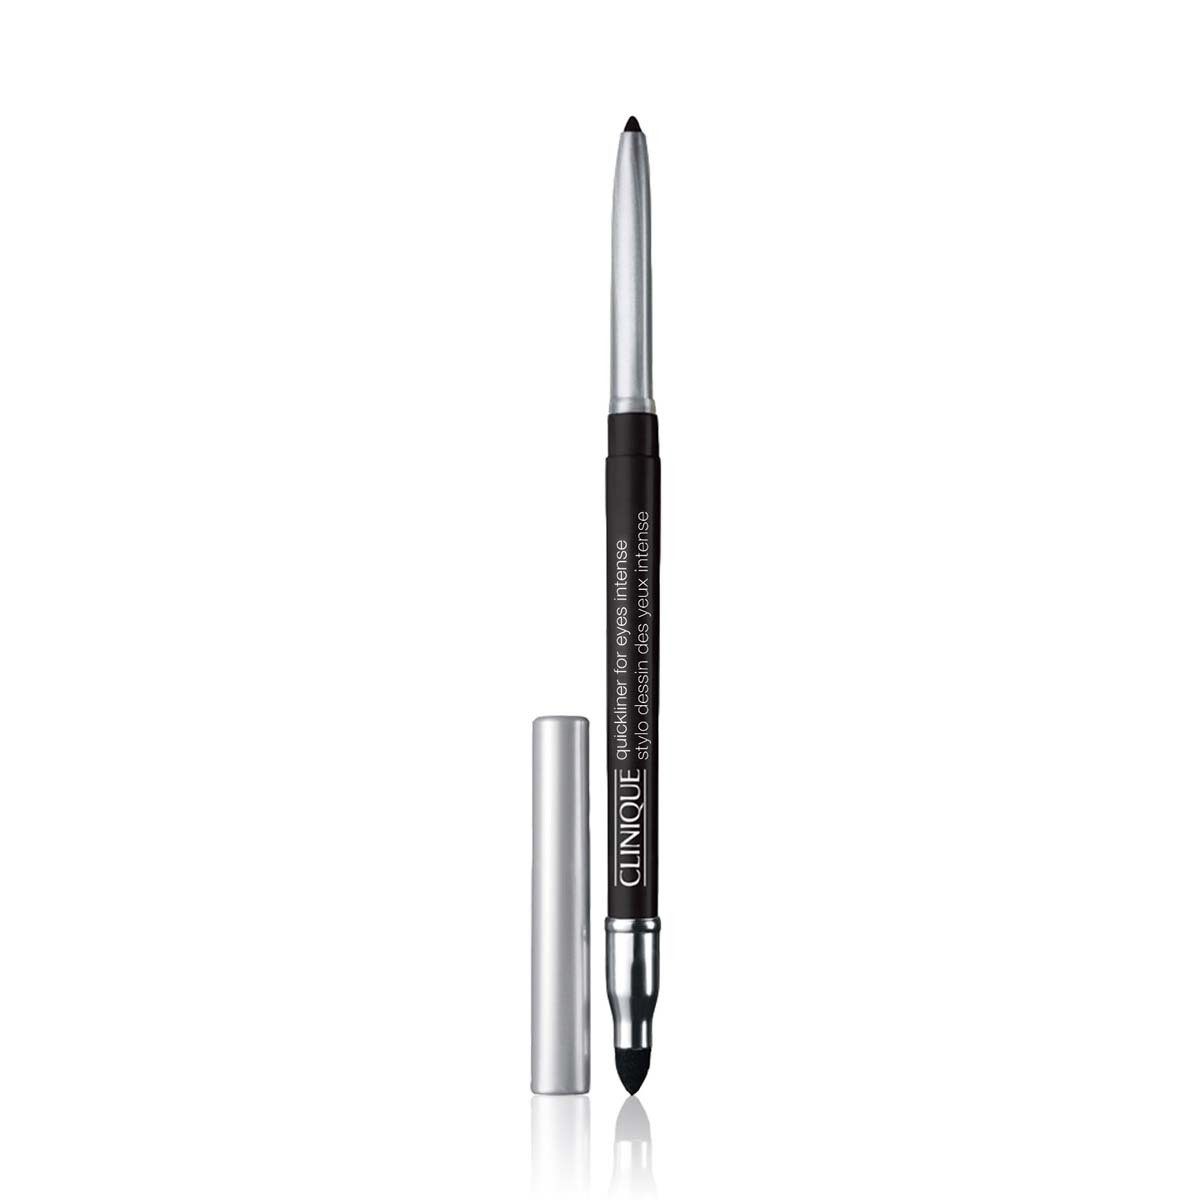 Clinique quickliner for eyes intense - 09 intense ebony 0,28 g, 09 INTENSE EBONY, large image number 0